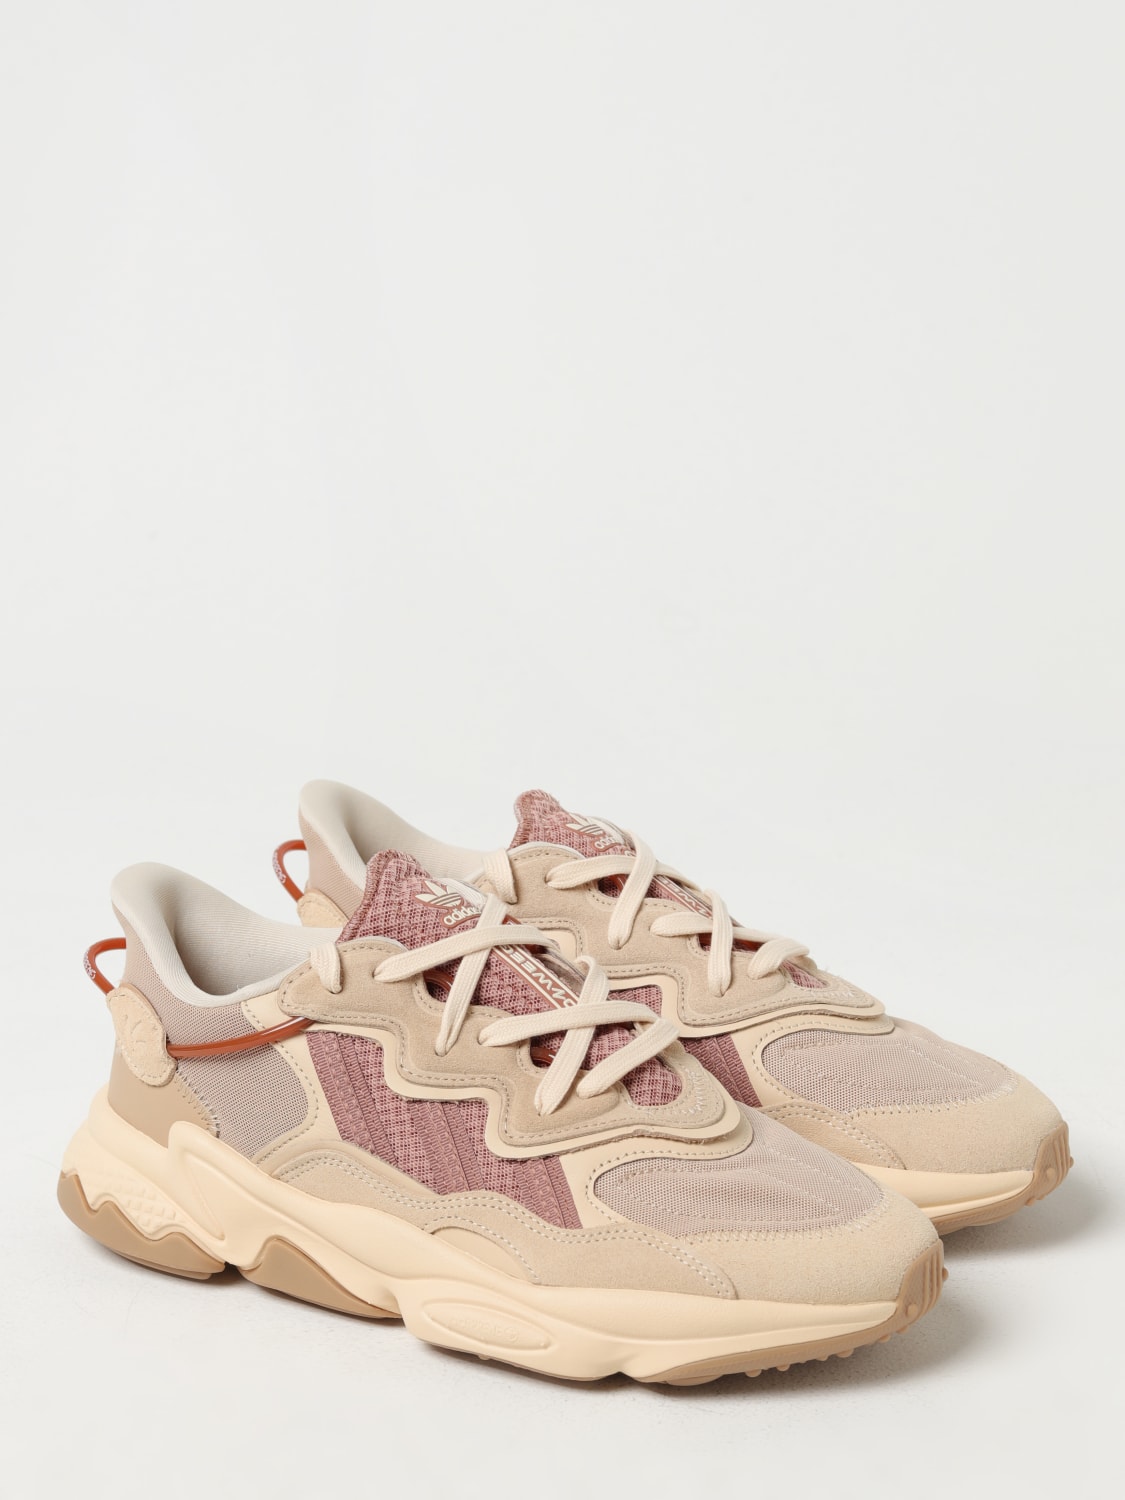 ADIDAS ORIGINALS: Ozweego sneakers in mesh and suede - Beige | Adidas  Originals sneakers ID9821 online at